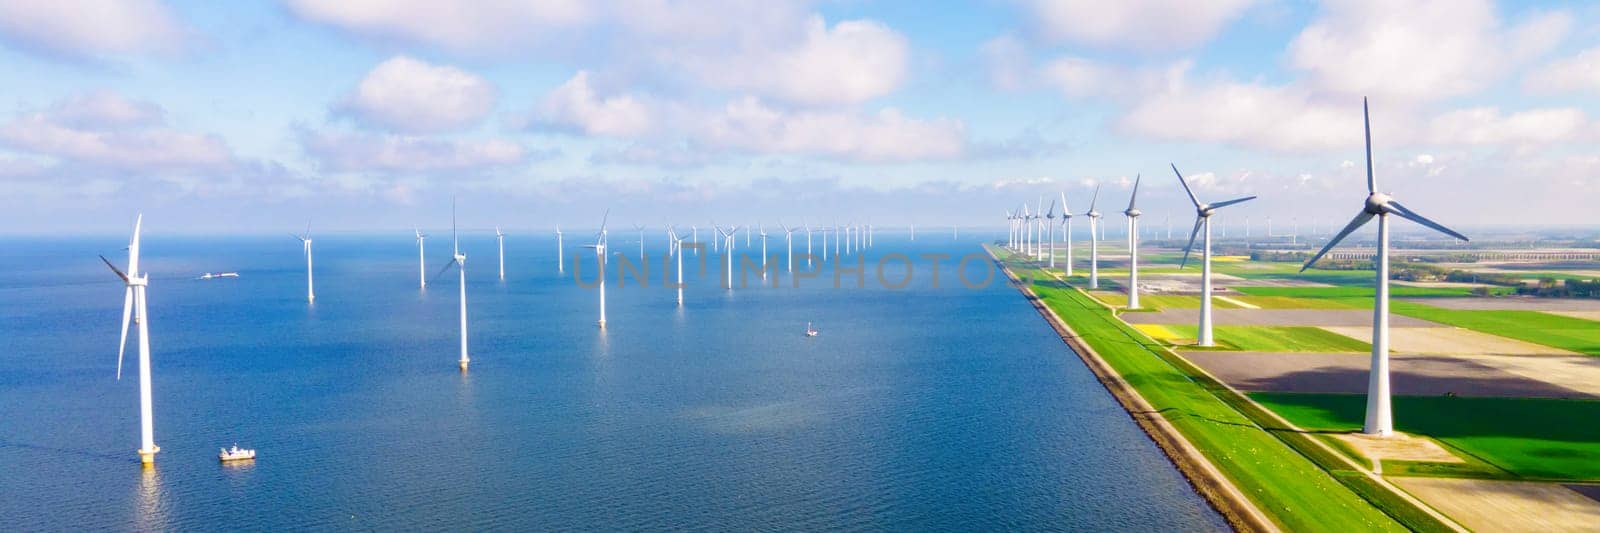 Wndmill park in the ocean aerial view with wind turbine Flevoland Netherlands Ijsselmeer. Green Energy in the Netherlands on a sunny day